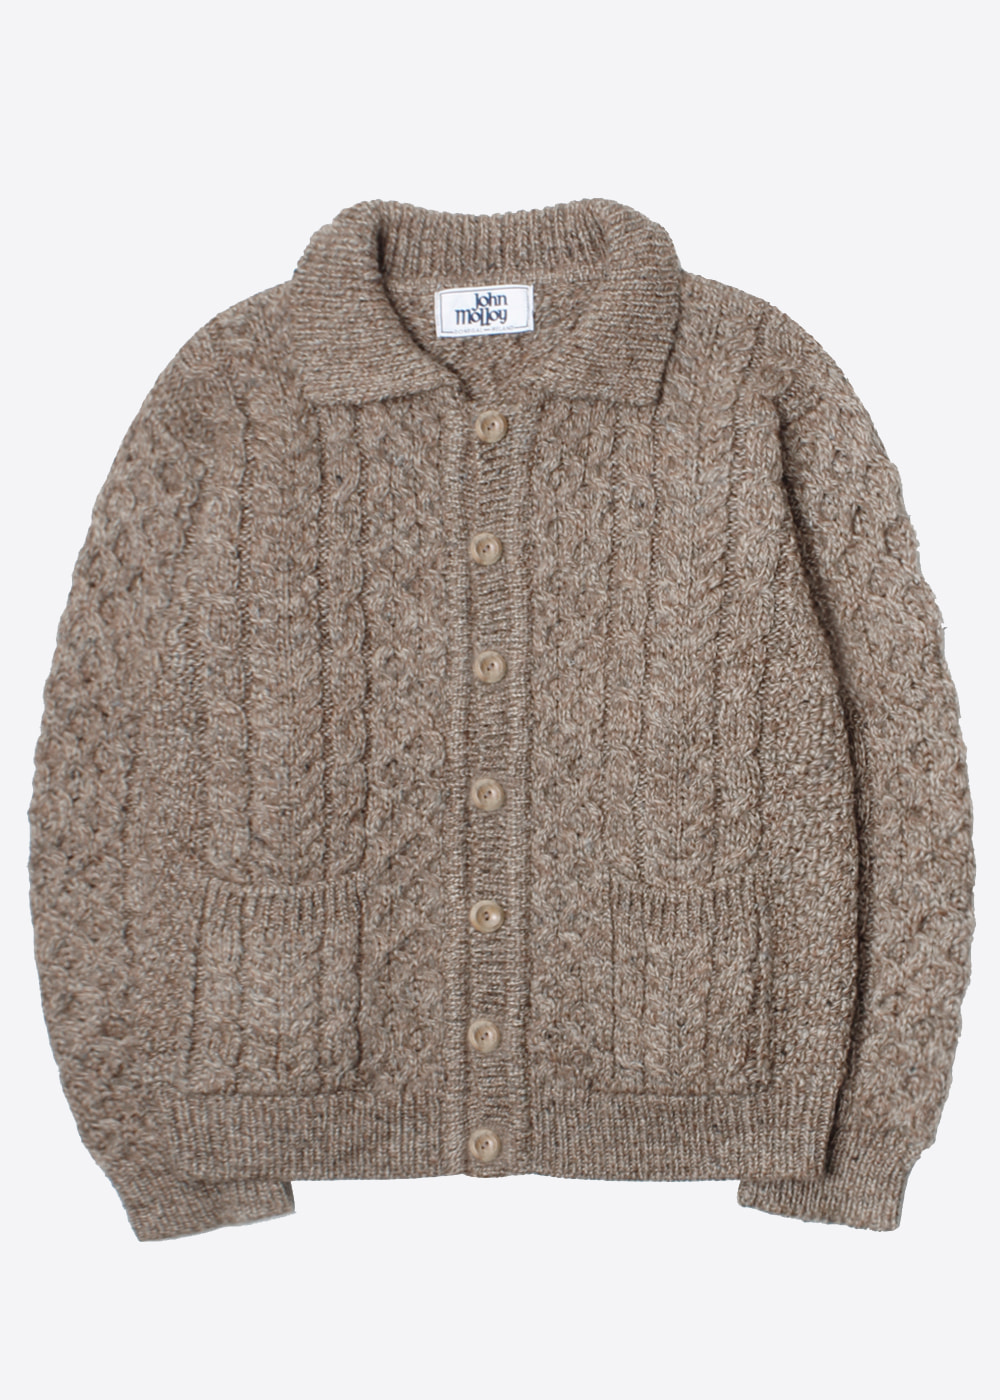 JOHN MOLLOY’over fit’cable heavy wool knit cardigan